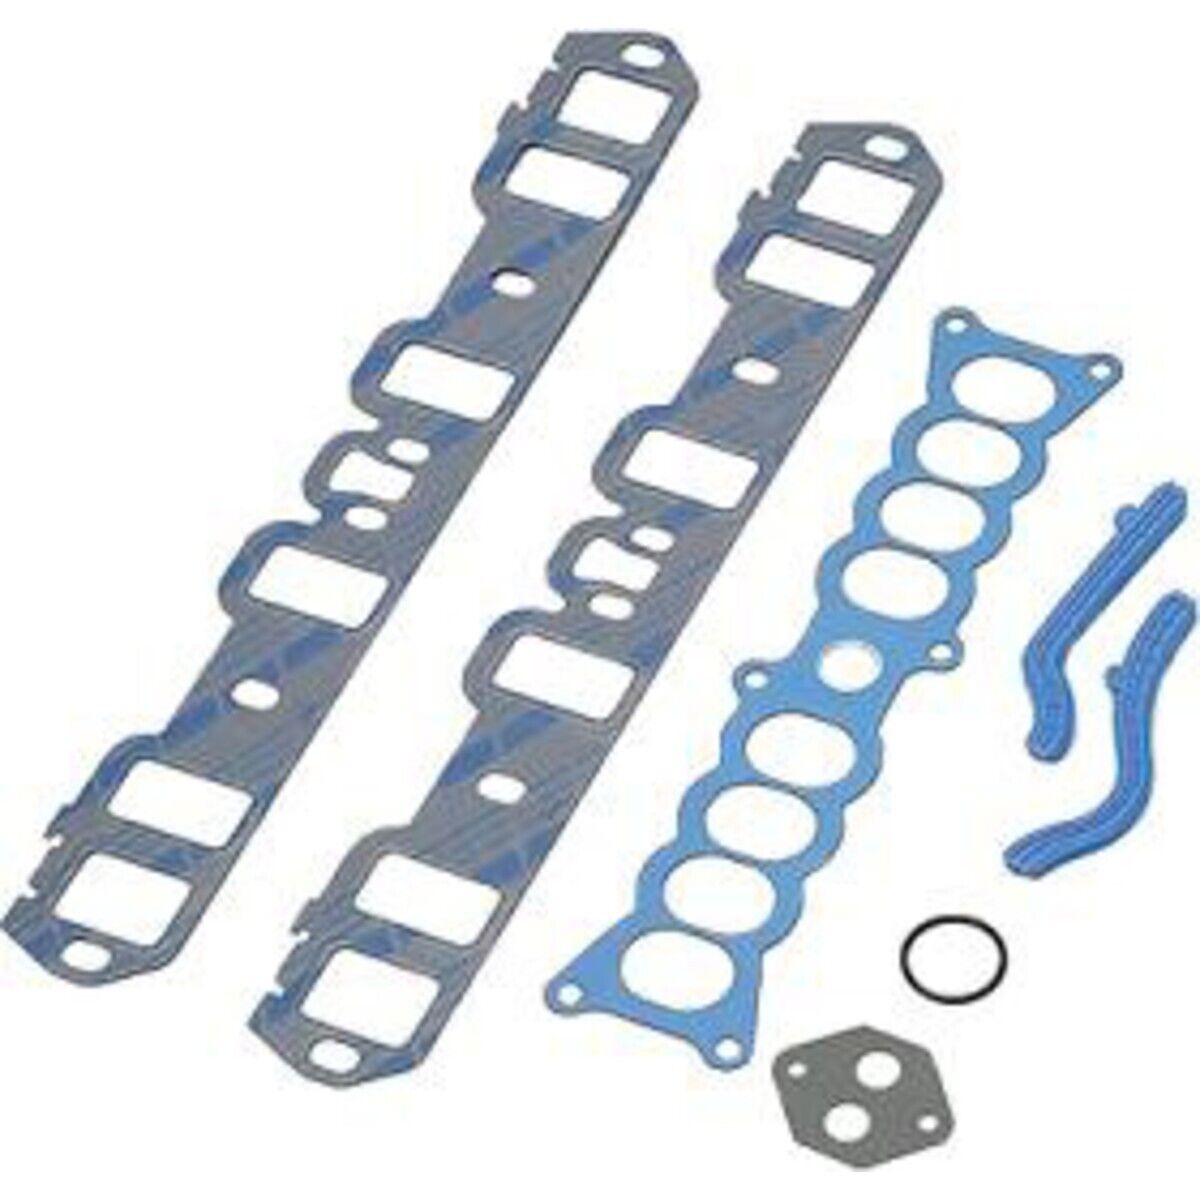 MS 93334 Felpro Intake Manifold Gaskets Set for Country Ford Mustang Mercury LTD